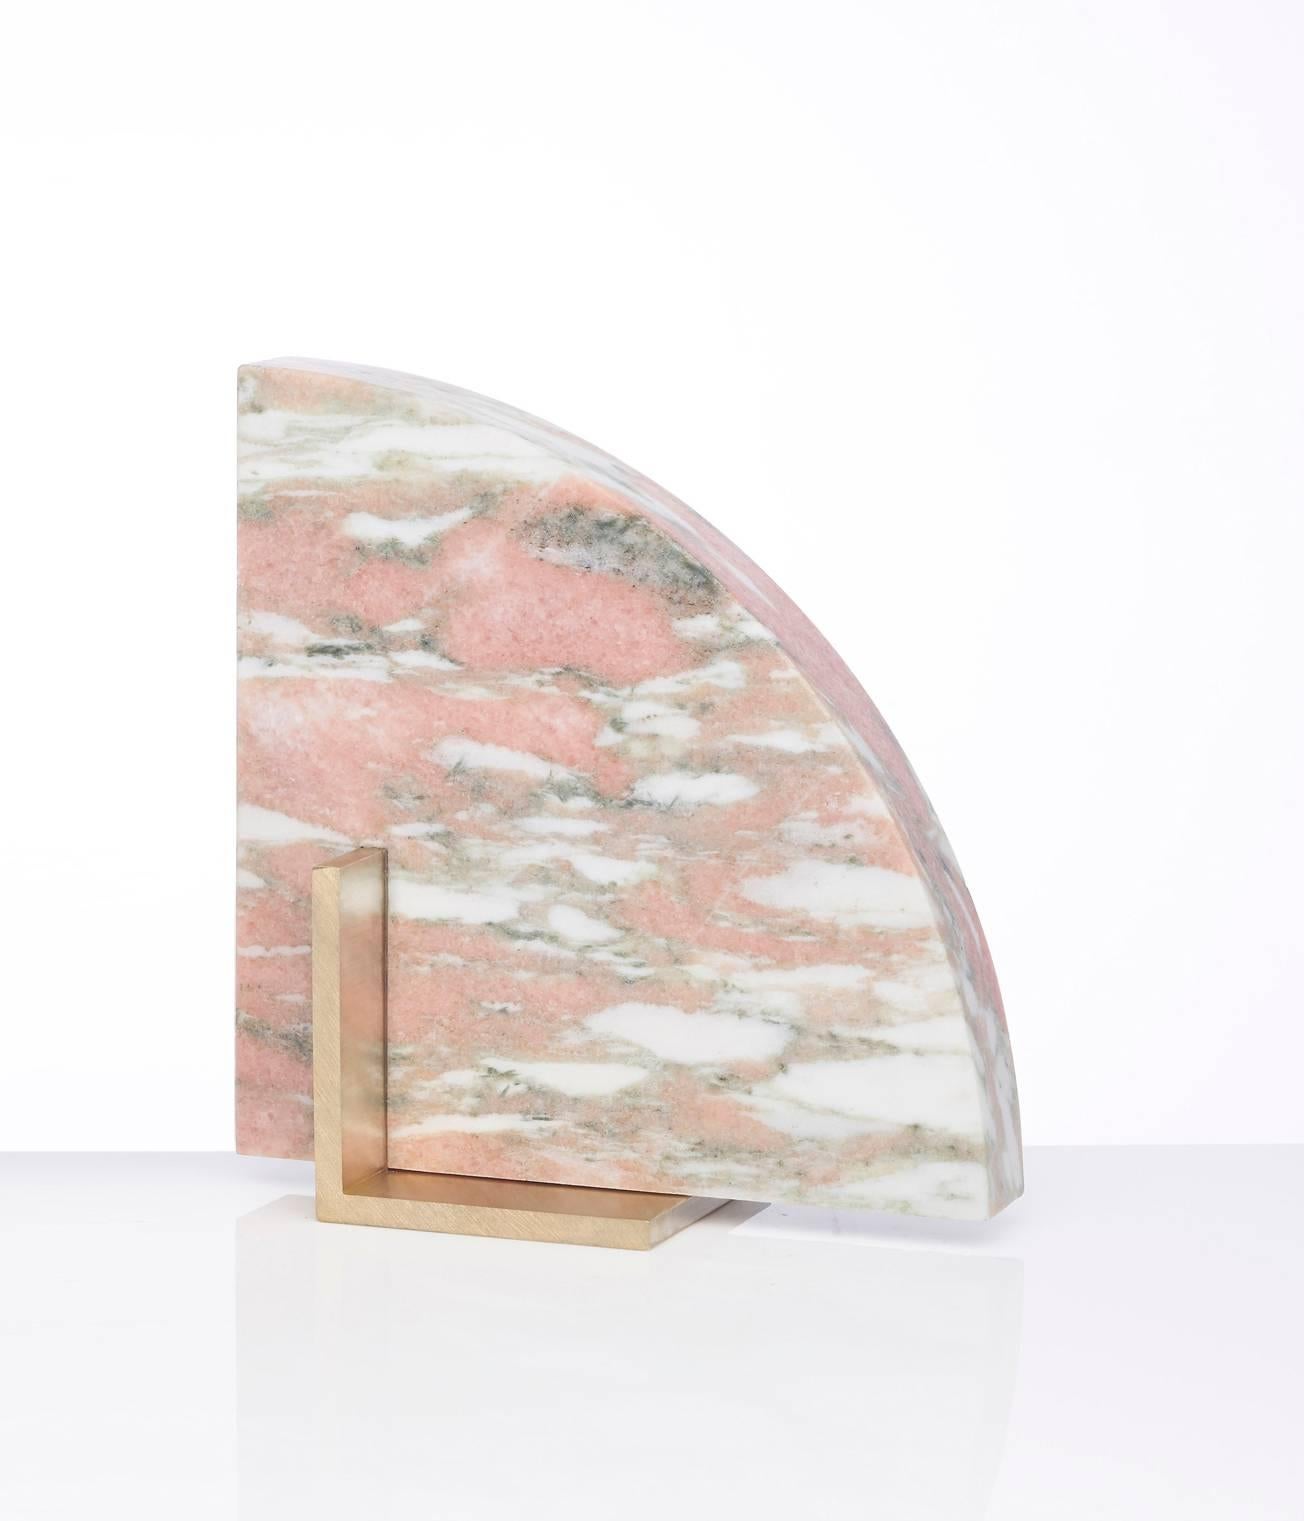 Meet curvy; one half of the odd couple bookends set which are now available to buy individually. You can now mix and match colors and shapes.
Curvy is available in Norwegian rose marble and a brushed brass base.
The marble is cut into a geometric